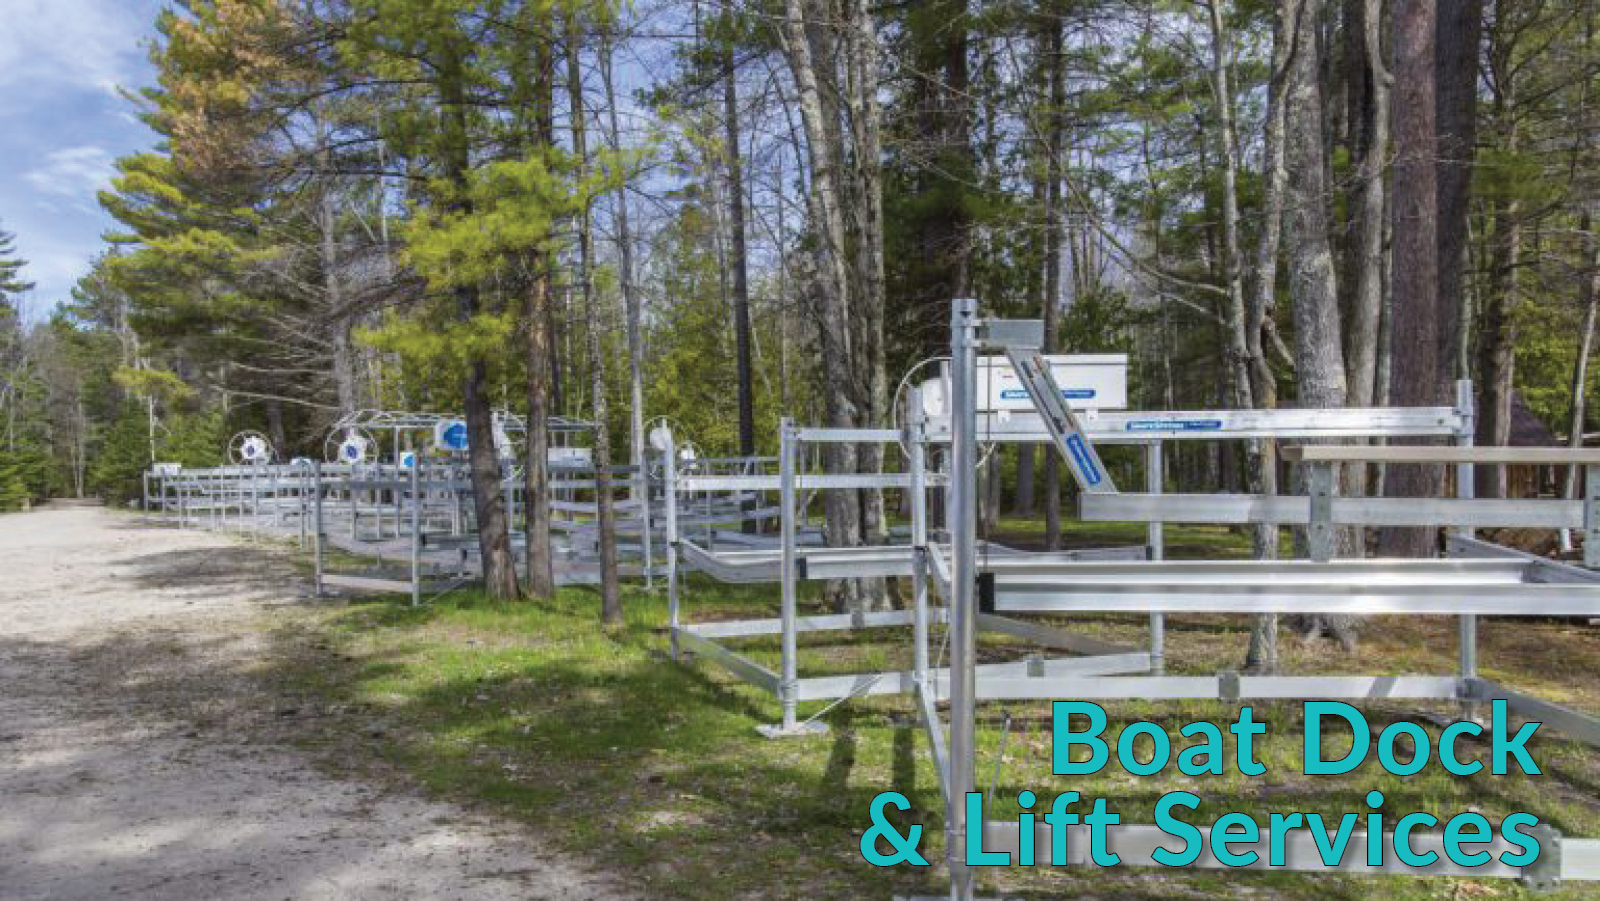 Boat Dock and Lift Services